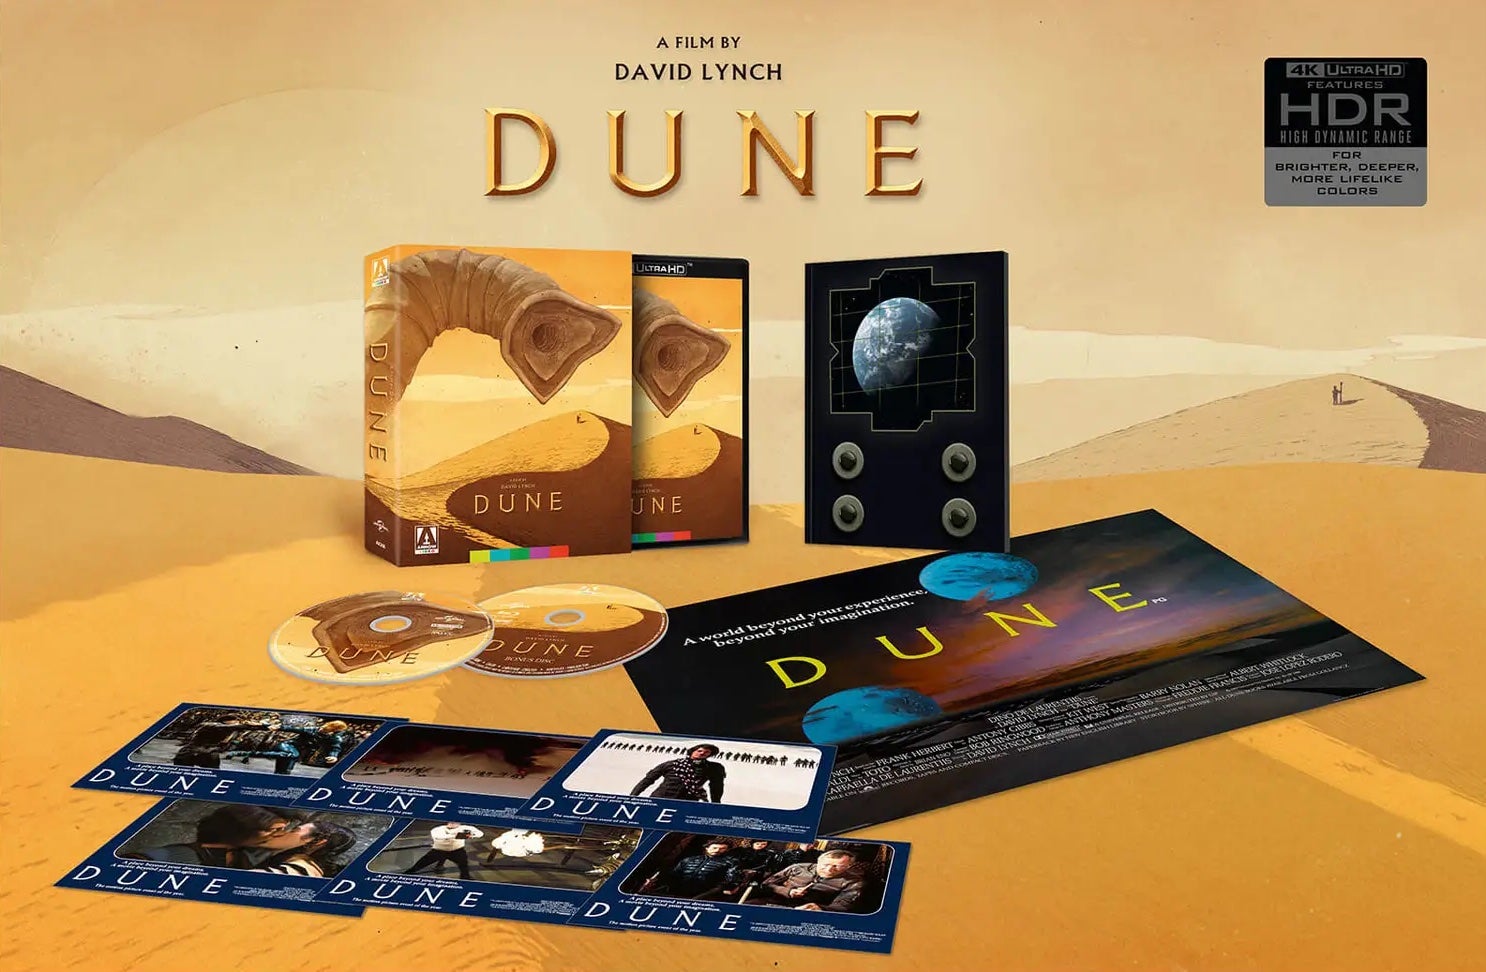 The contents of the Dune Limited Edition 4K Ultra HD set. (Image: Universal/Arrow Video)